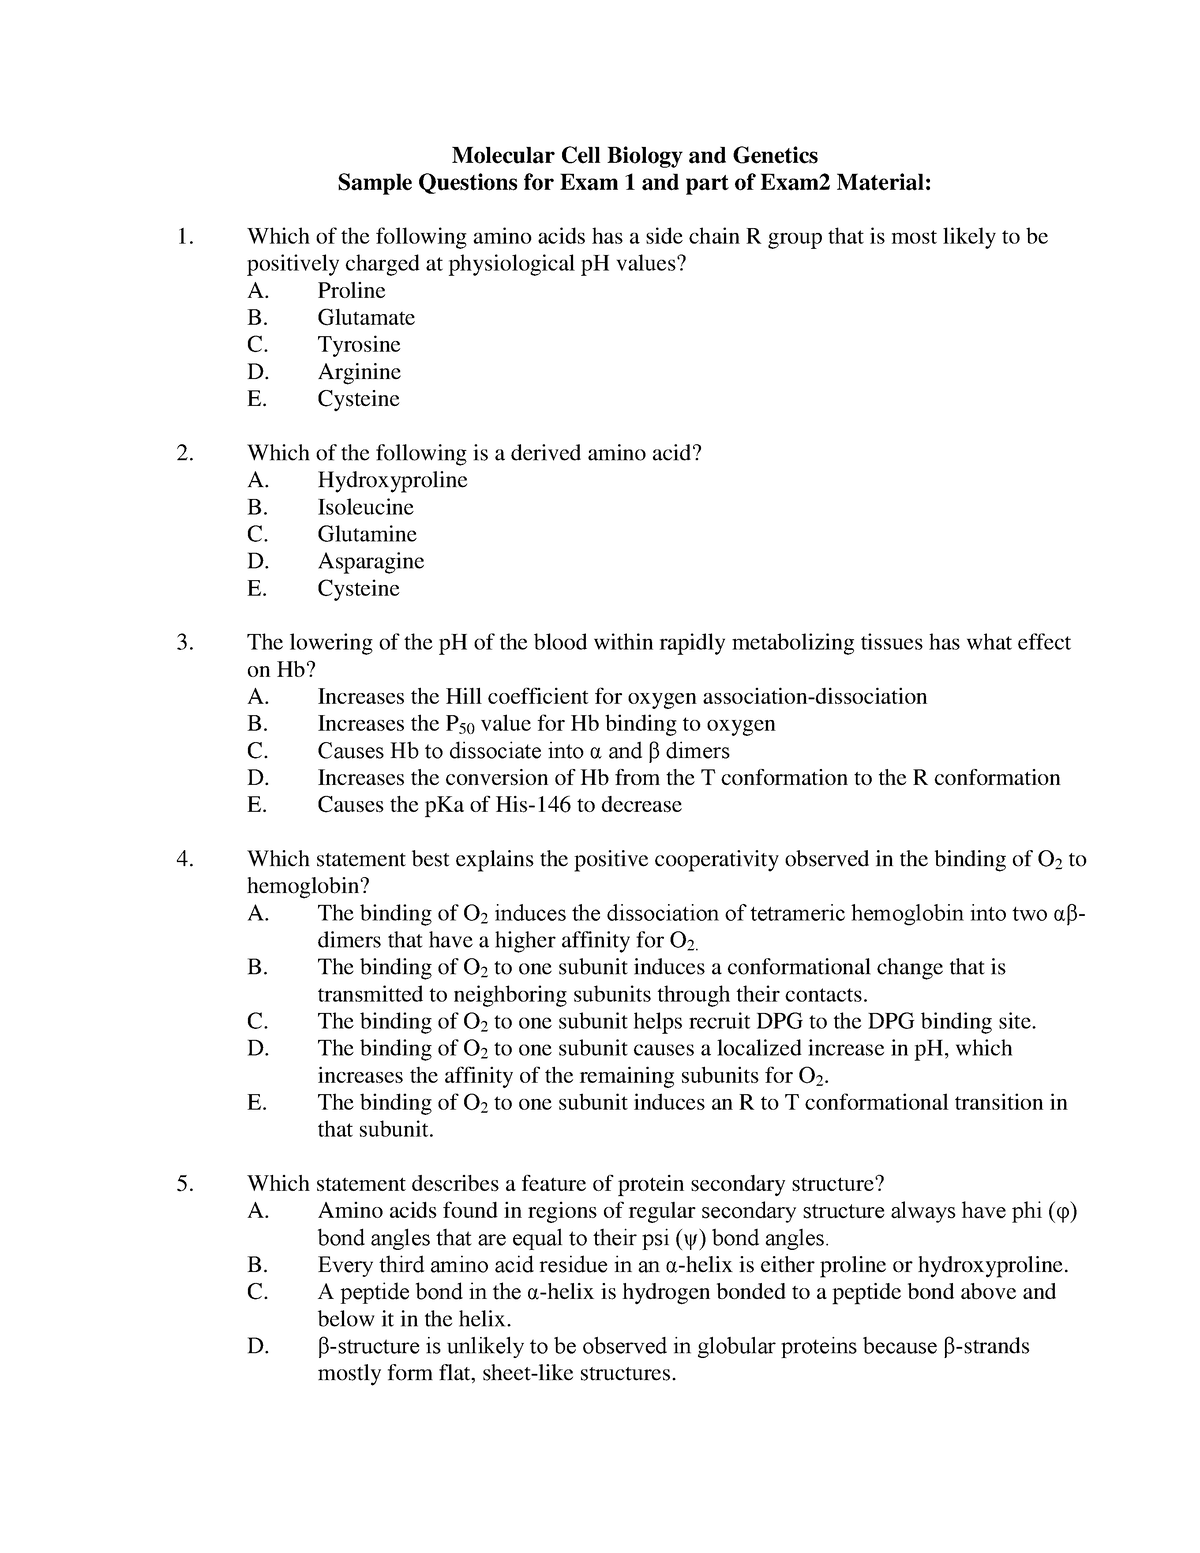 Sample Questions for Exam 1 Molecular Cell Biology and